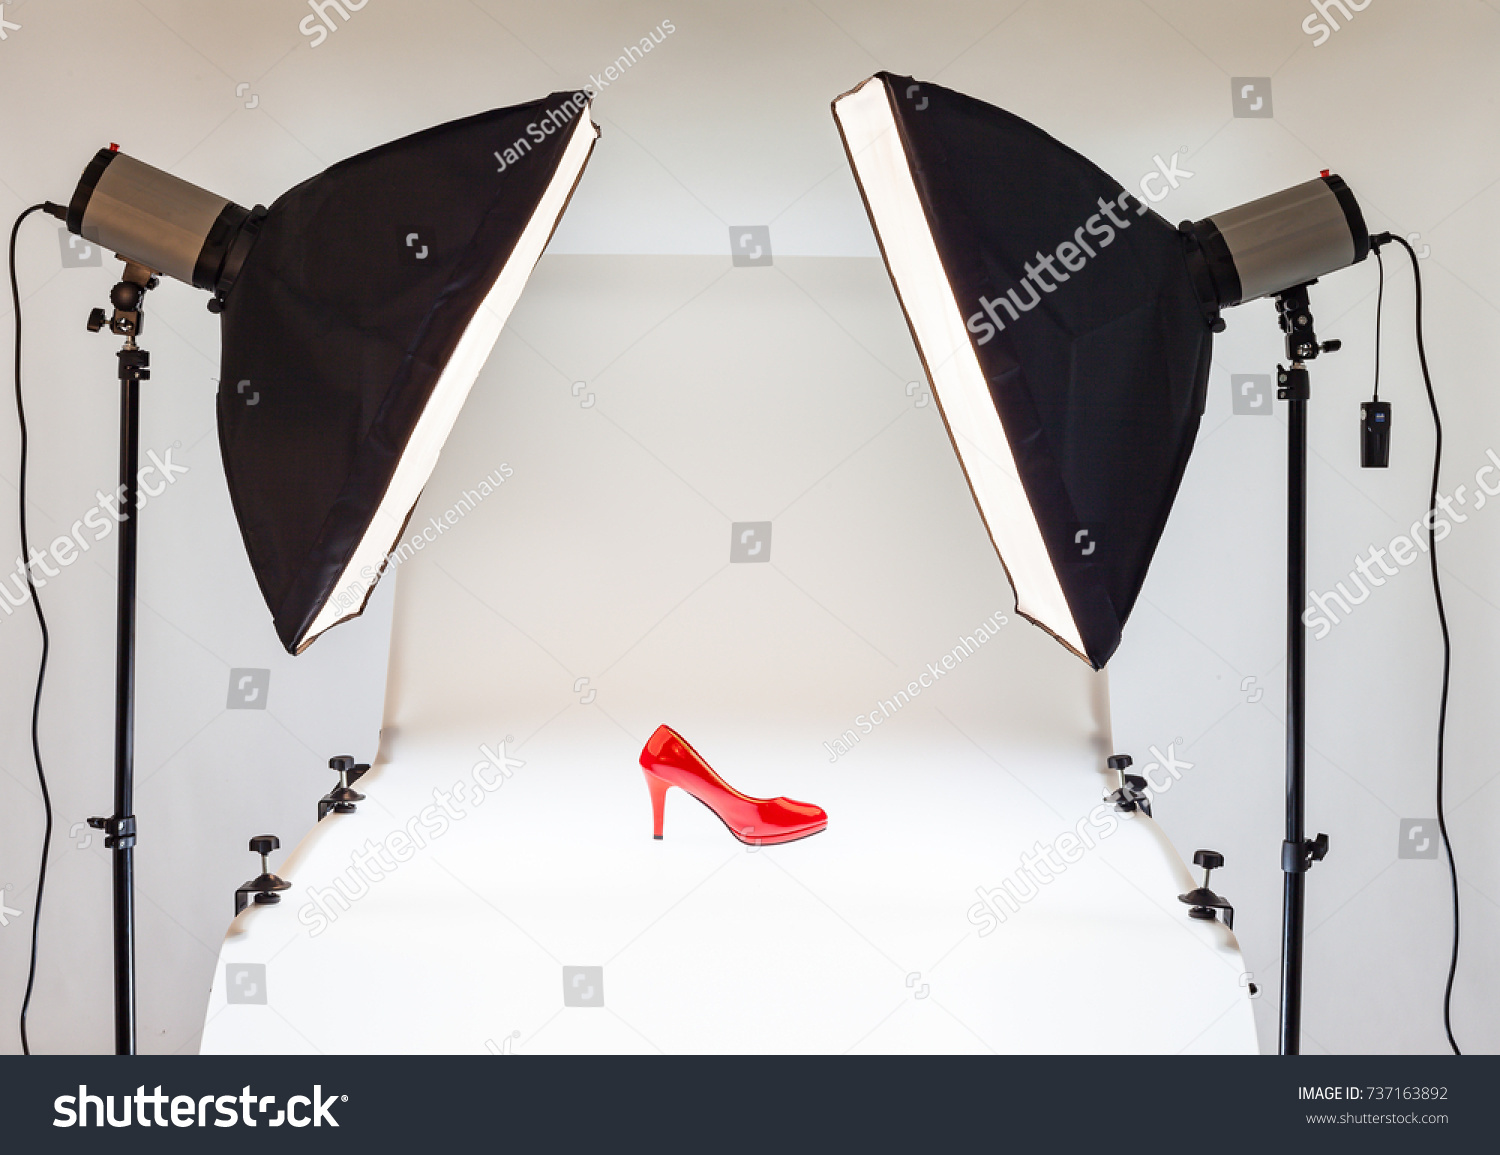 Photo table for product promotion #737163892